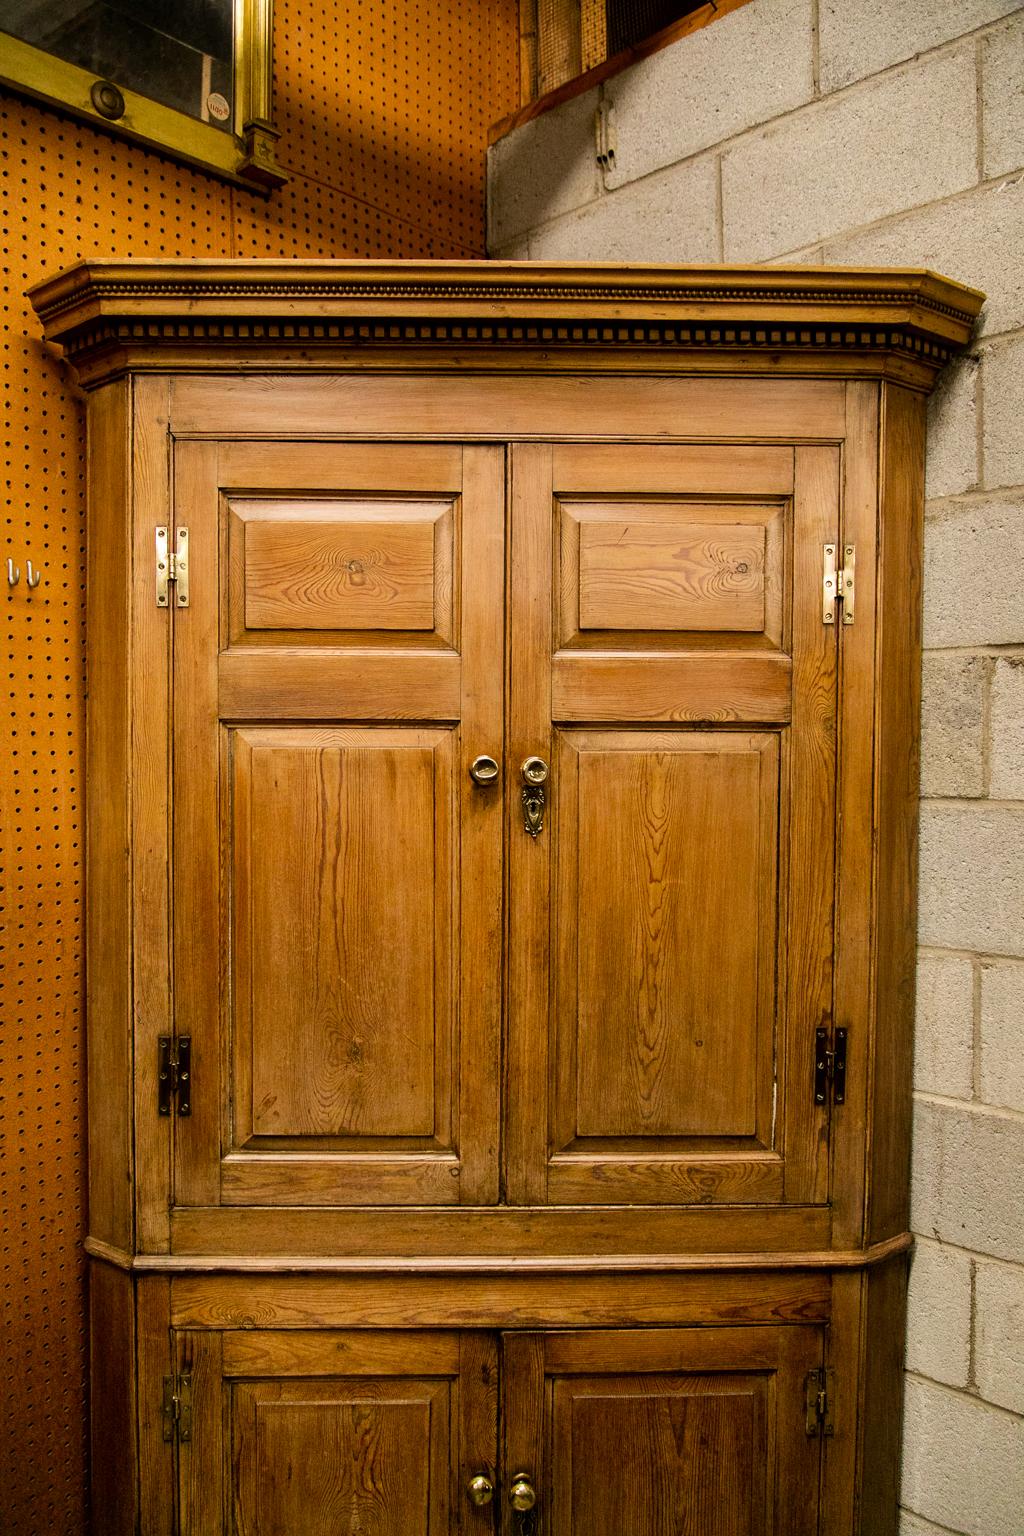 The cornice of this corner cupboard has a dentil and repeating bead molding. The doors on the top and bottom have raised panels framed by shaped moldings. The interior has been painted at a later date.